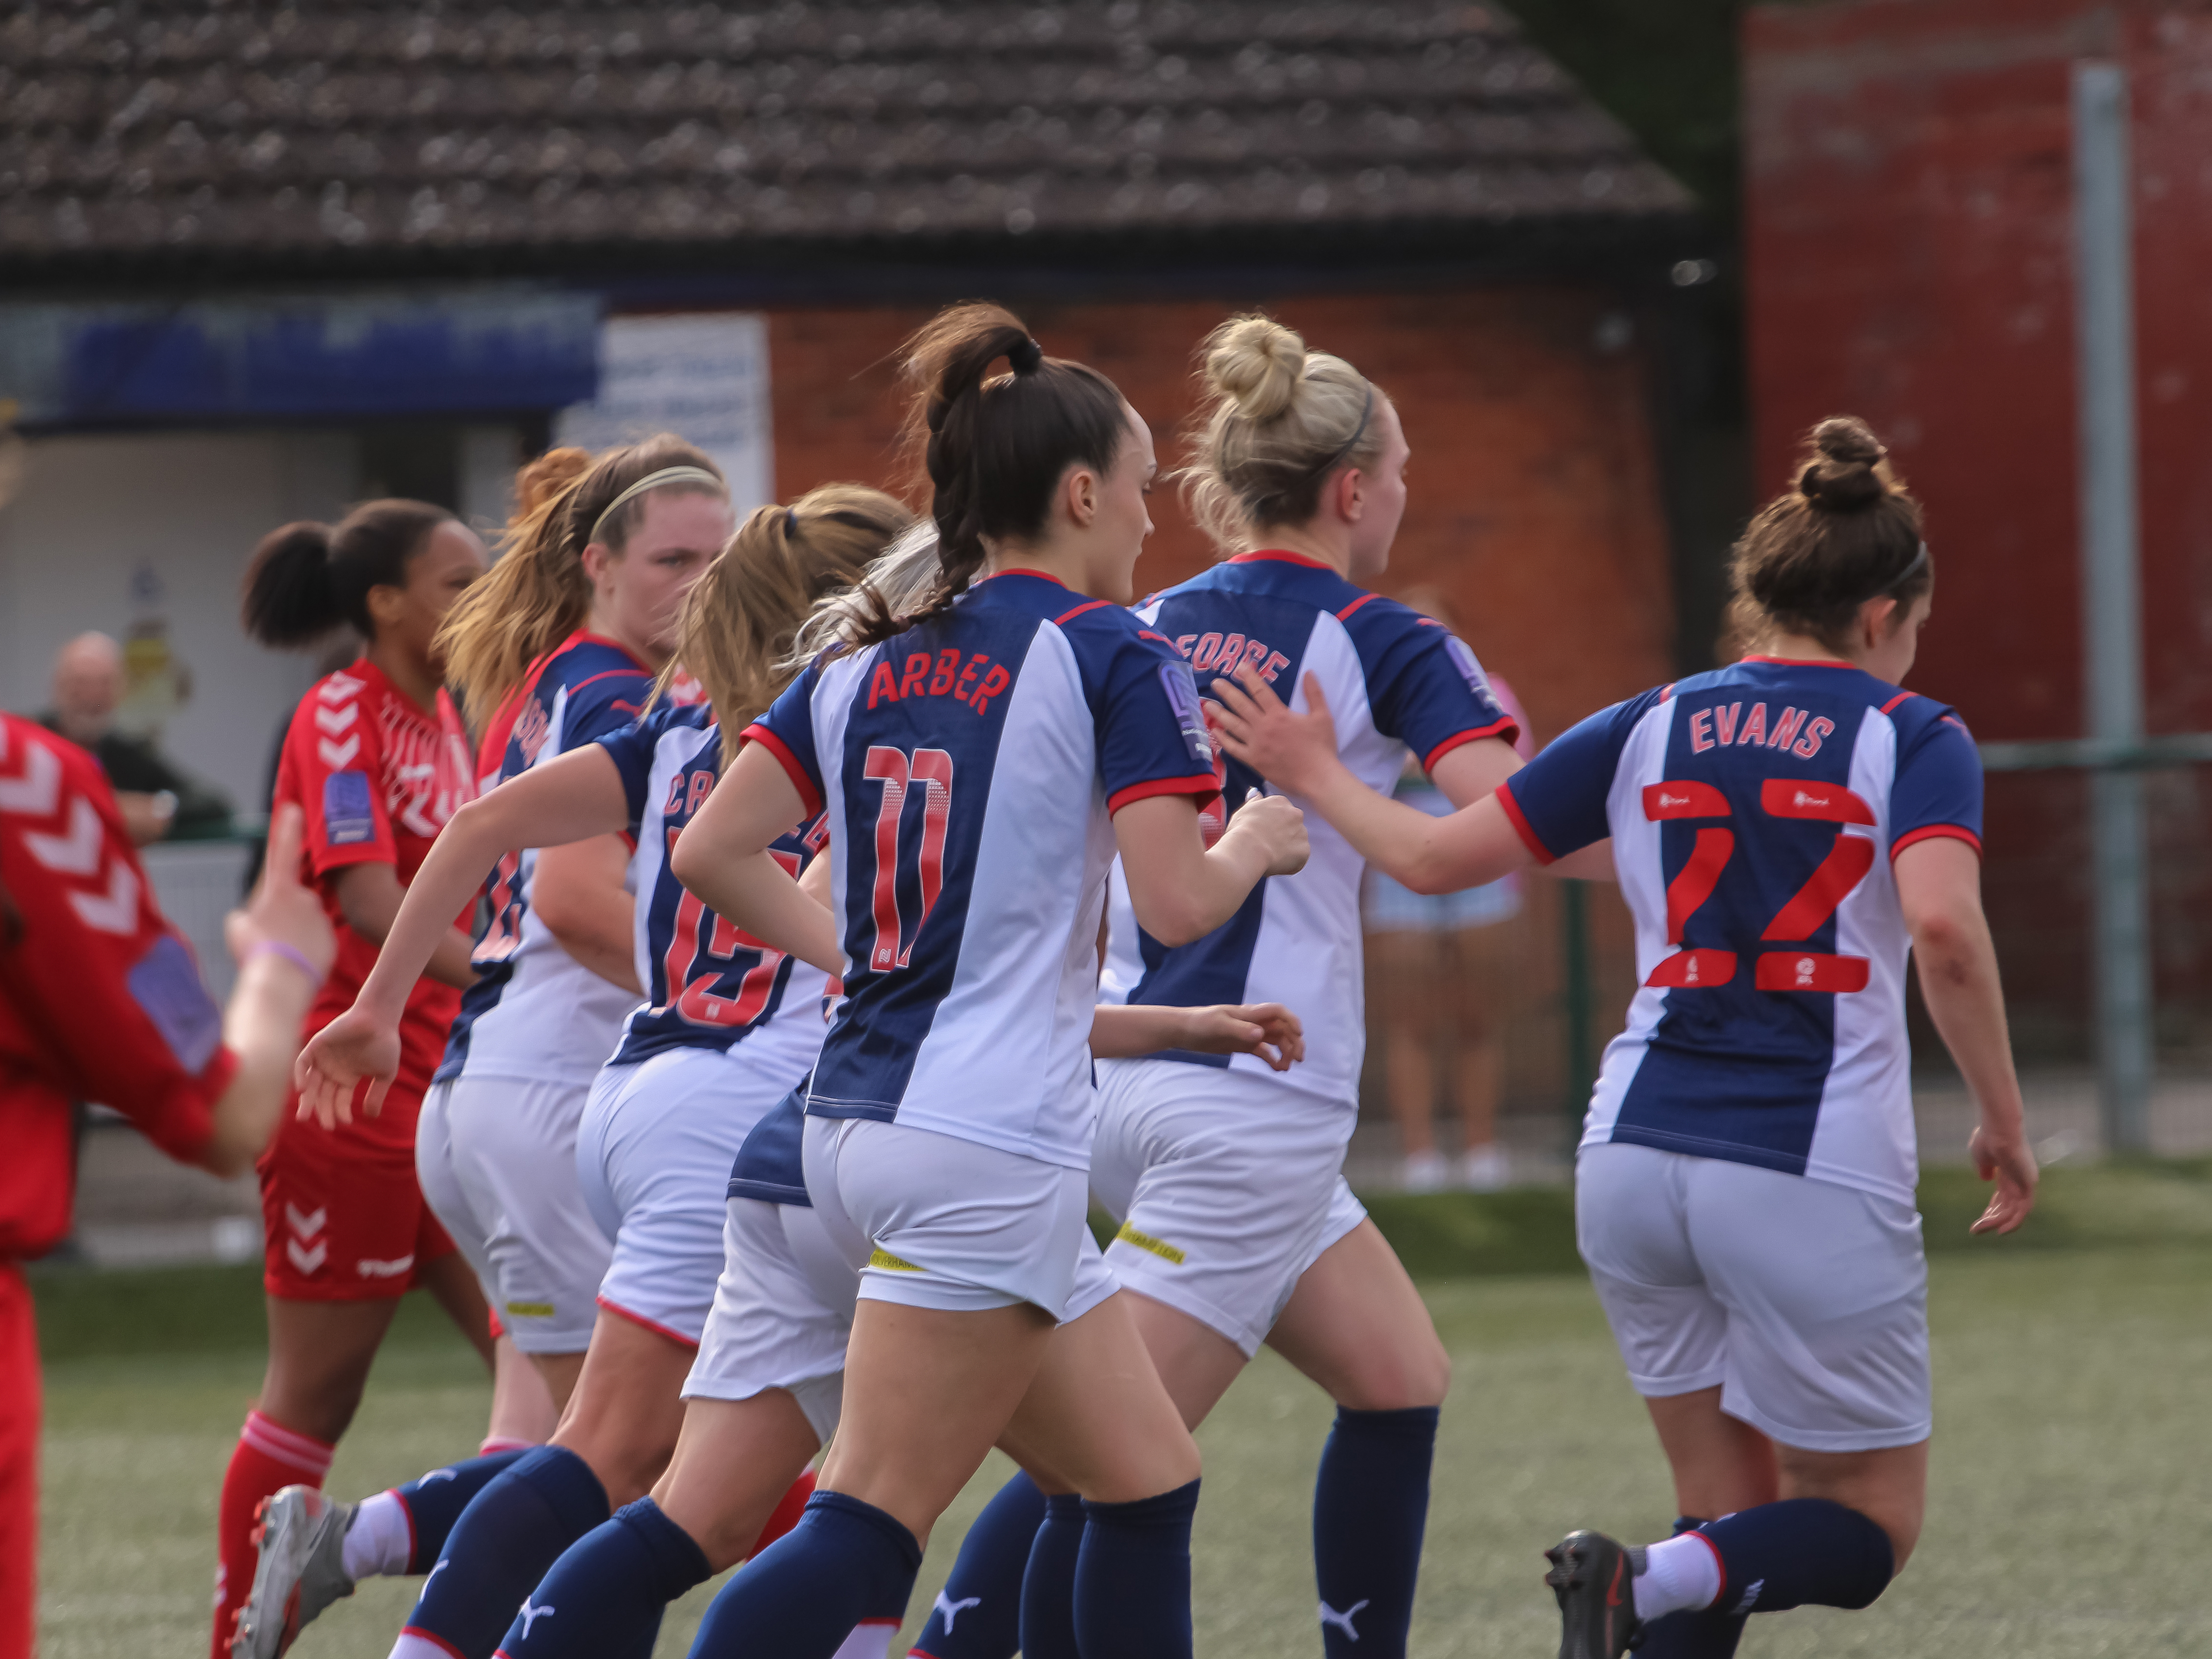 Hannah George’s stoppage time equaliser earned Albion Women a 1-1 draw with Middlesbrough on Sunday